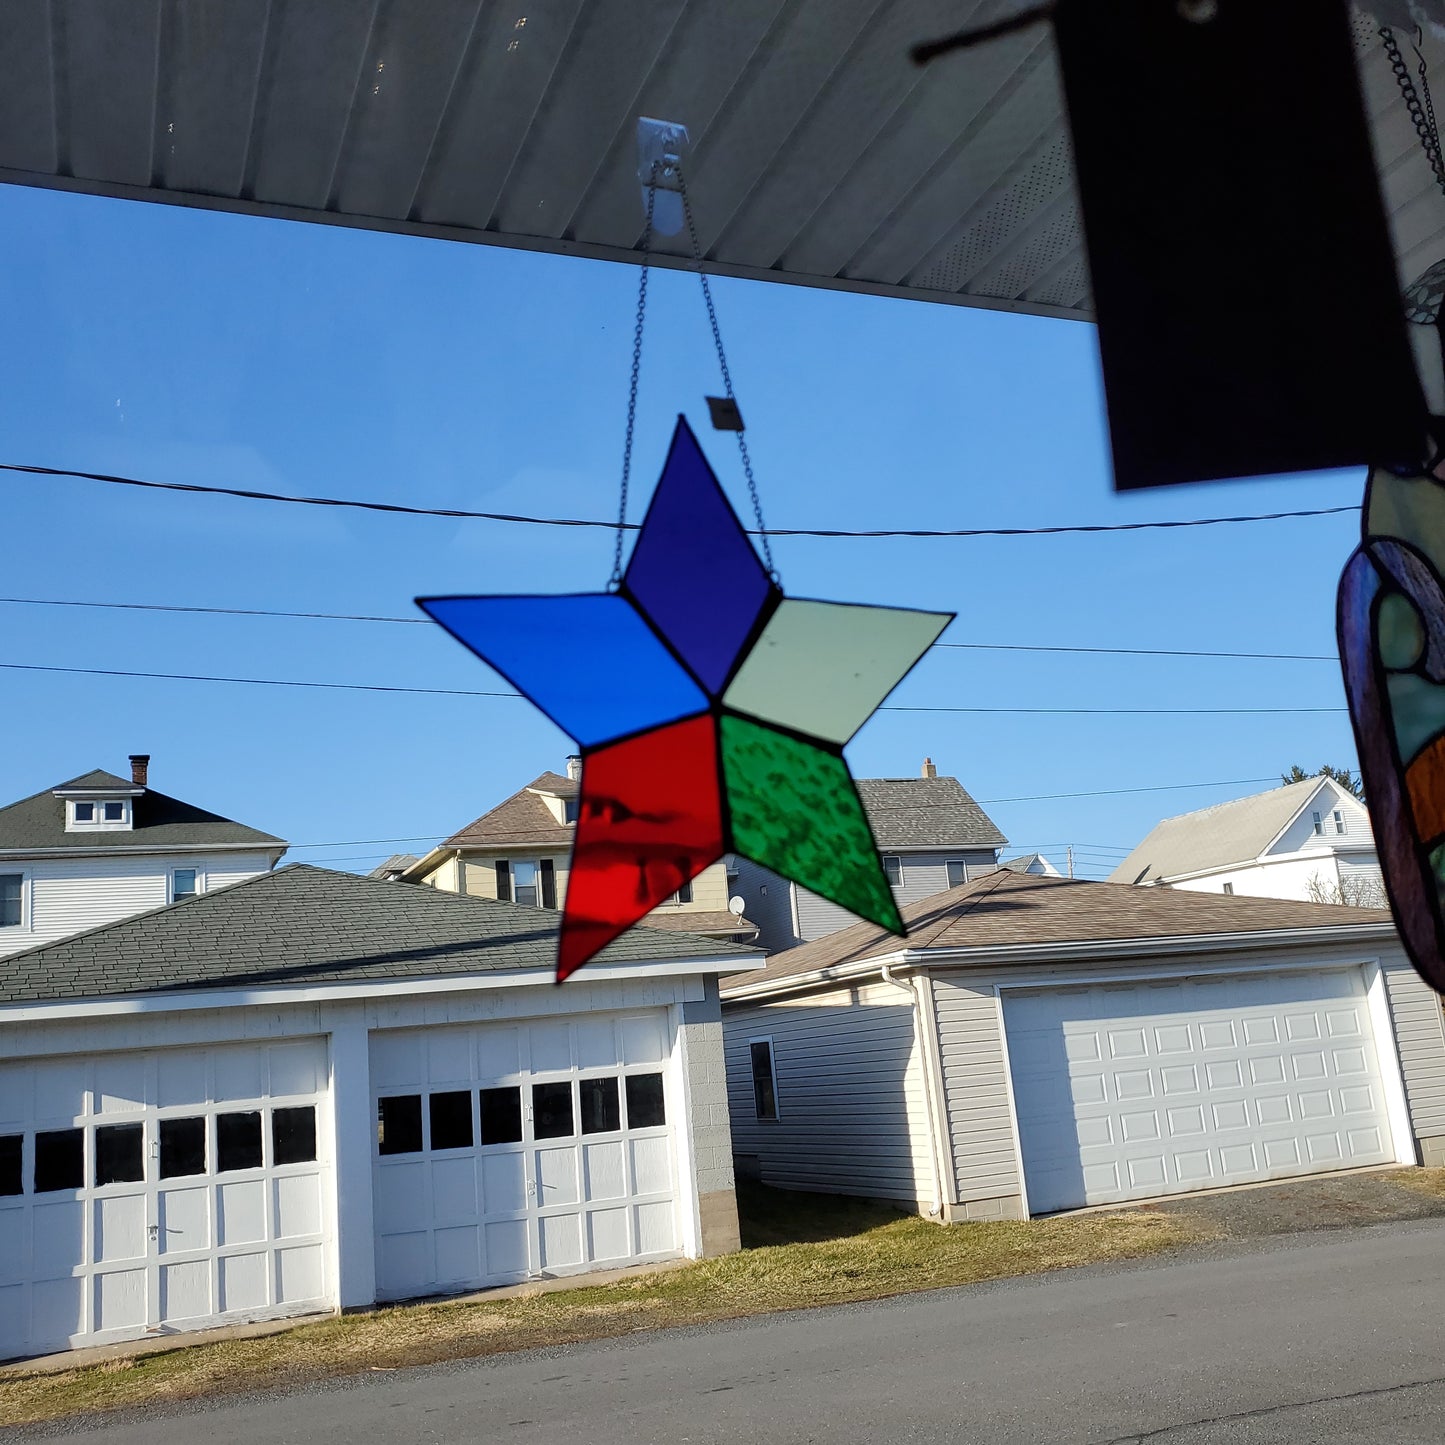 Large Stainglass 5 Element Point Star